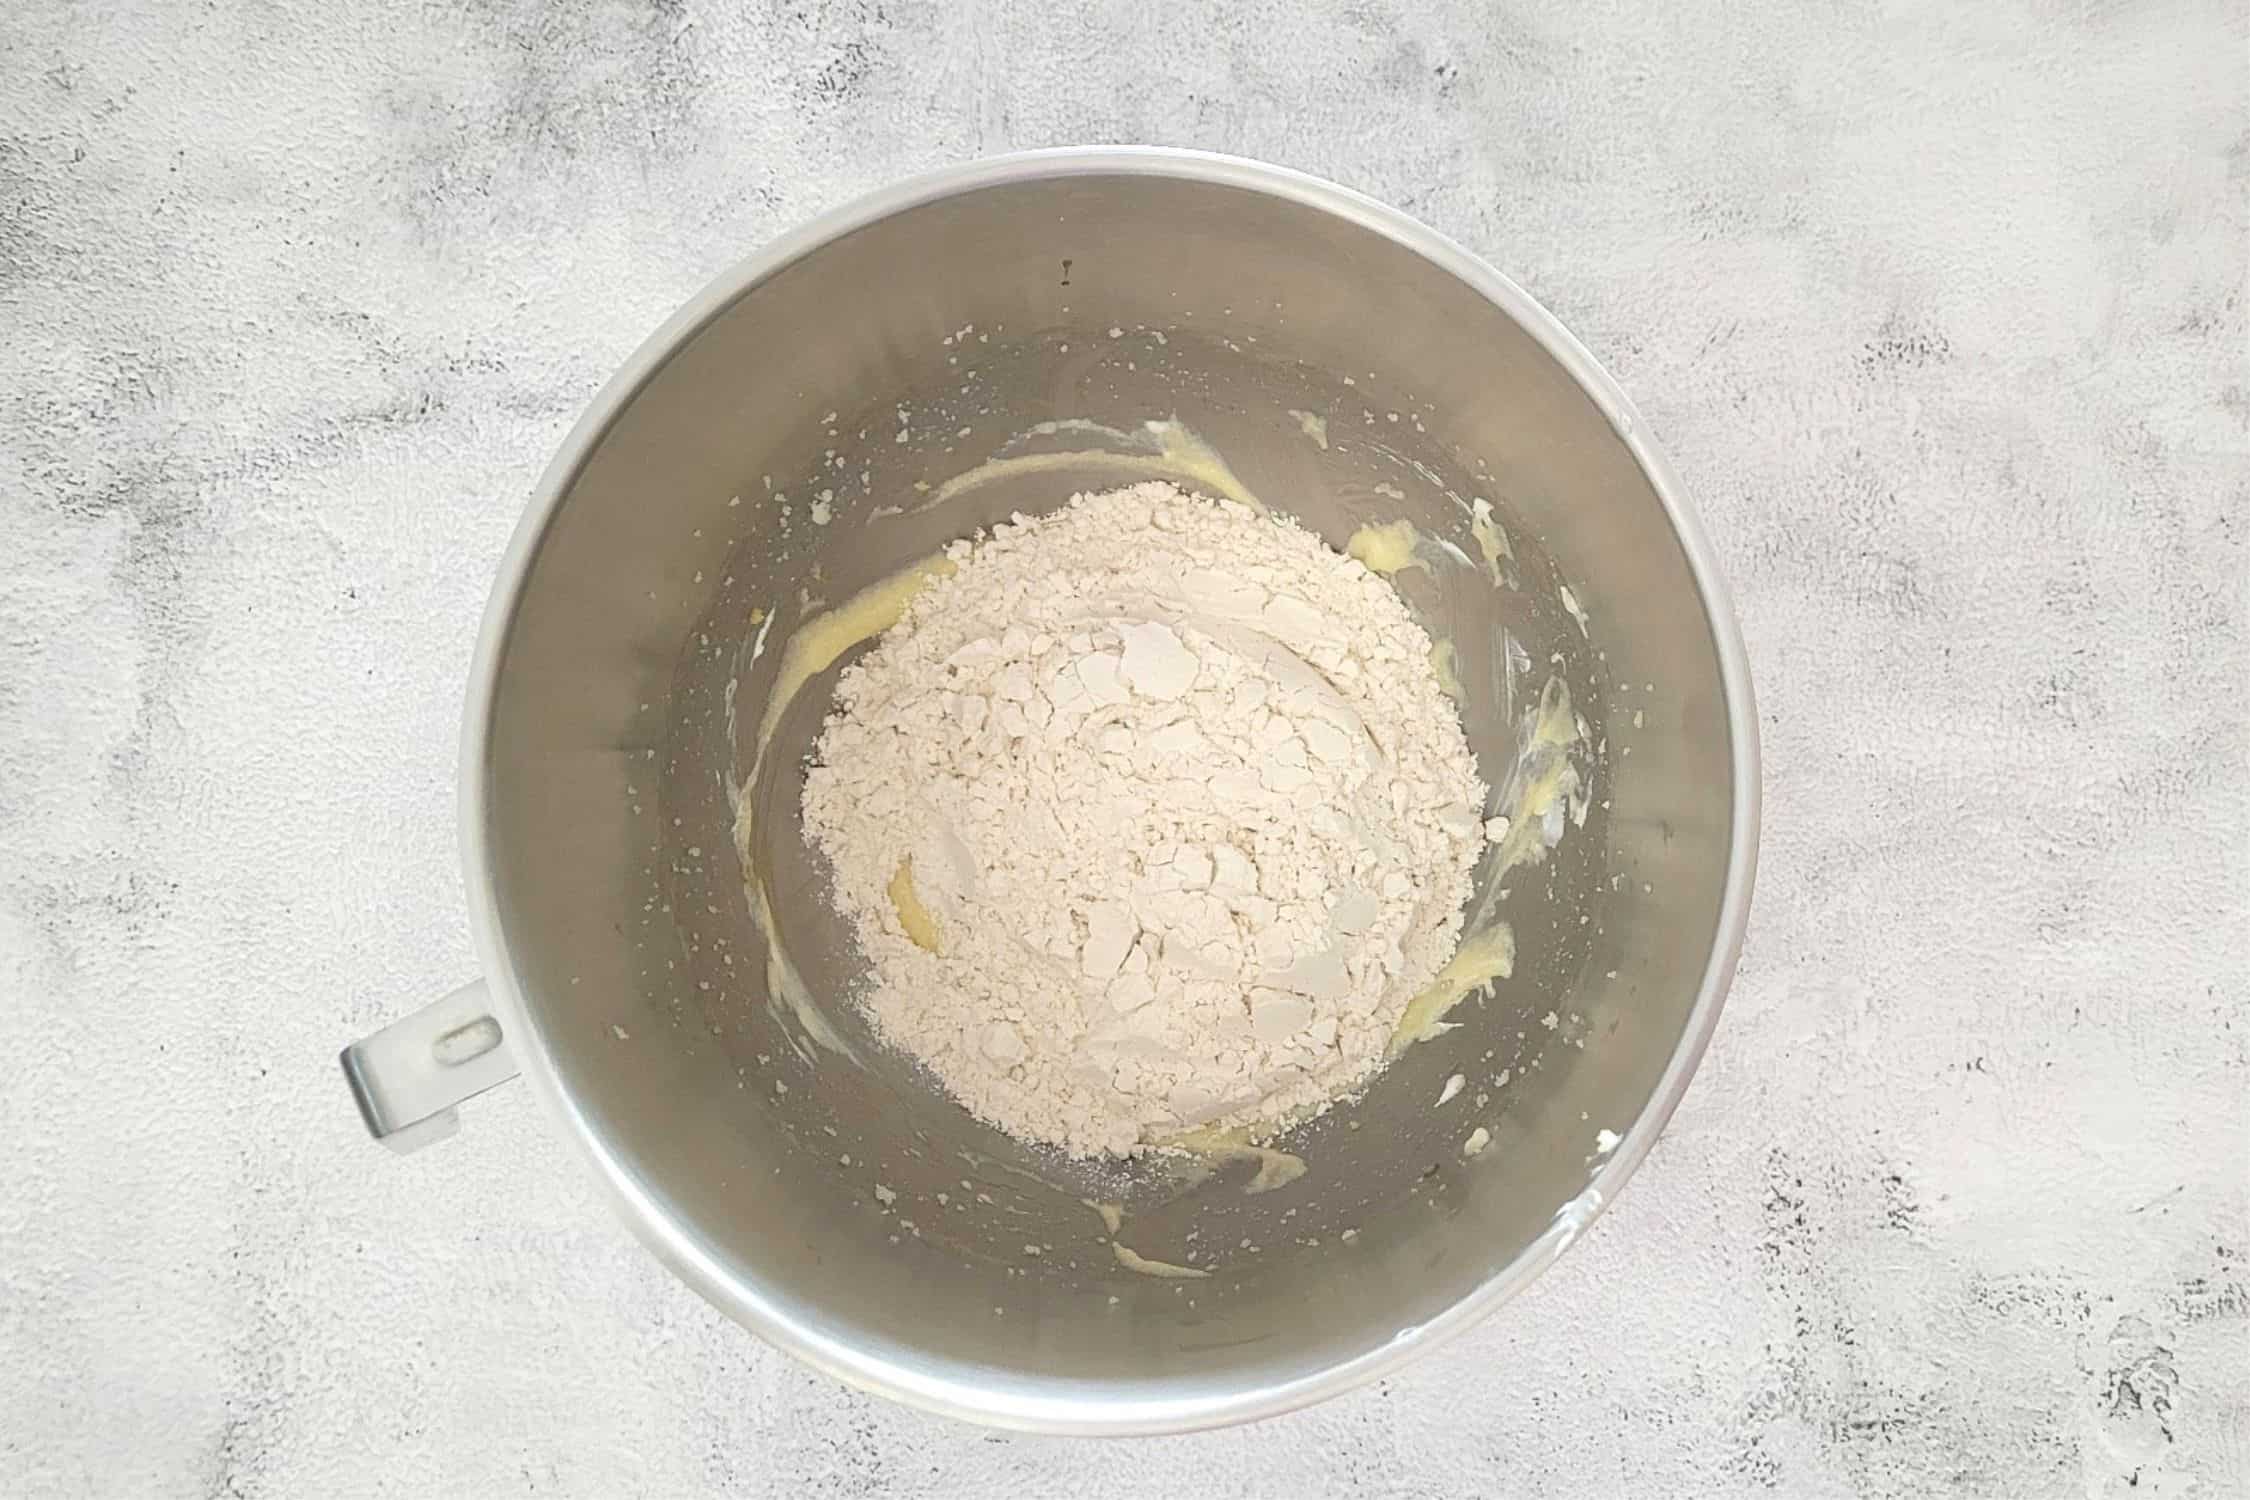 dry ingredients added to mixing bowl to make cookie dough